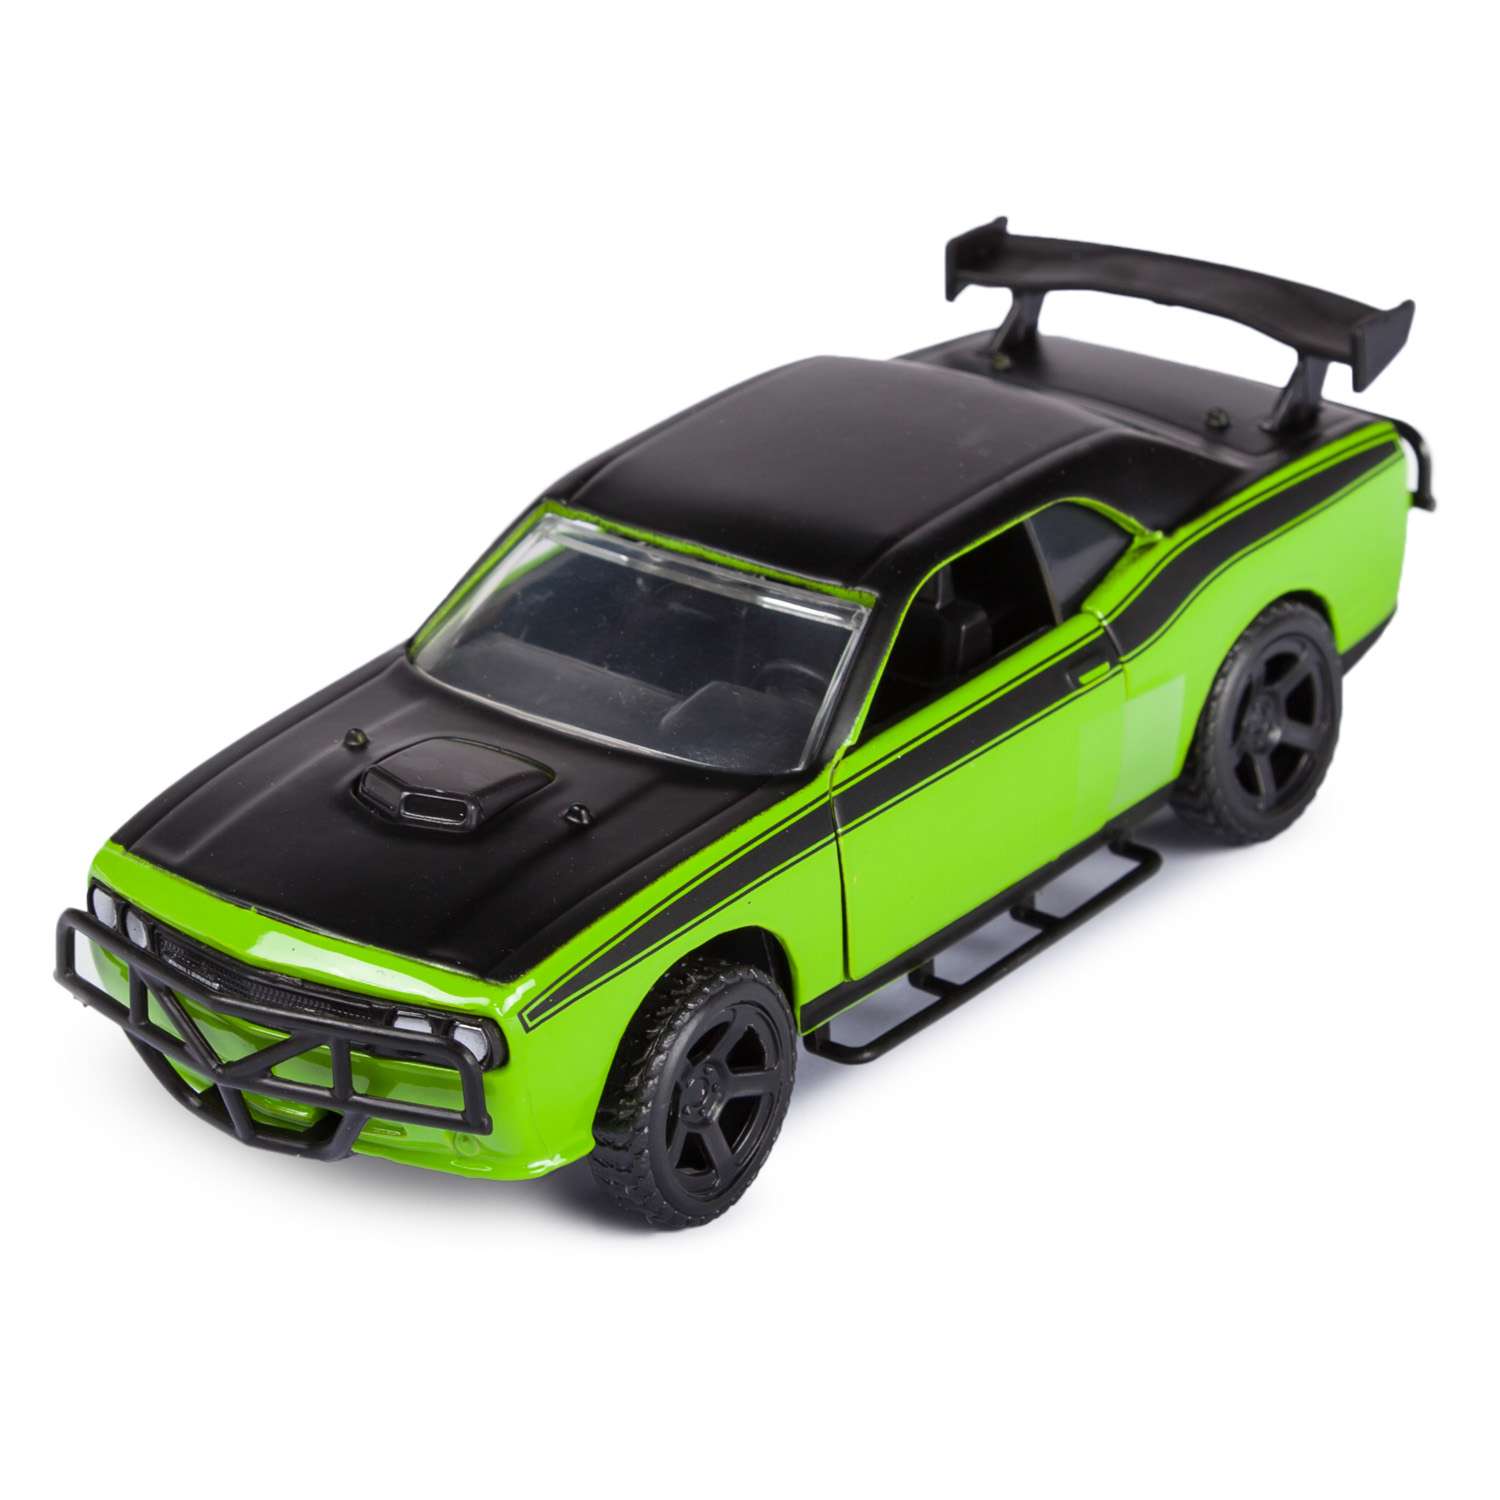 Машинка Fast and Furious Die-cast Challenger SRT8 Off-Road 1:32 металл 24037 - фото 1